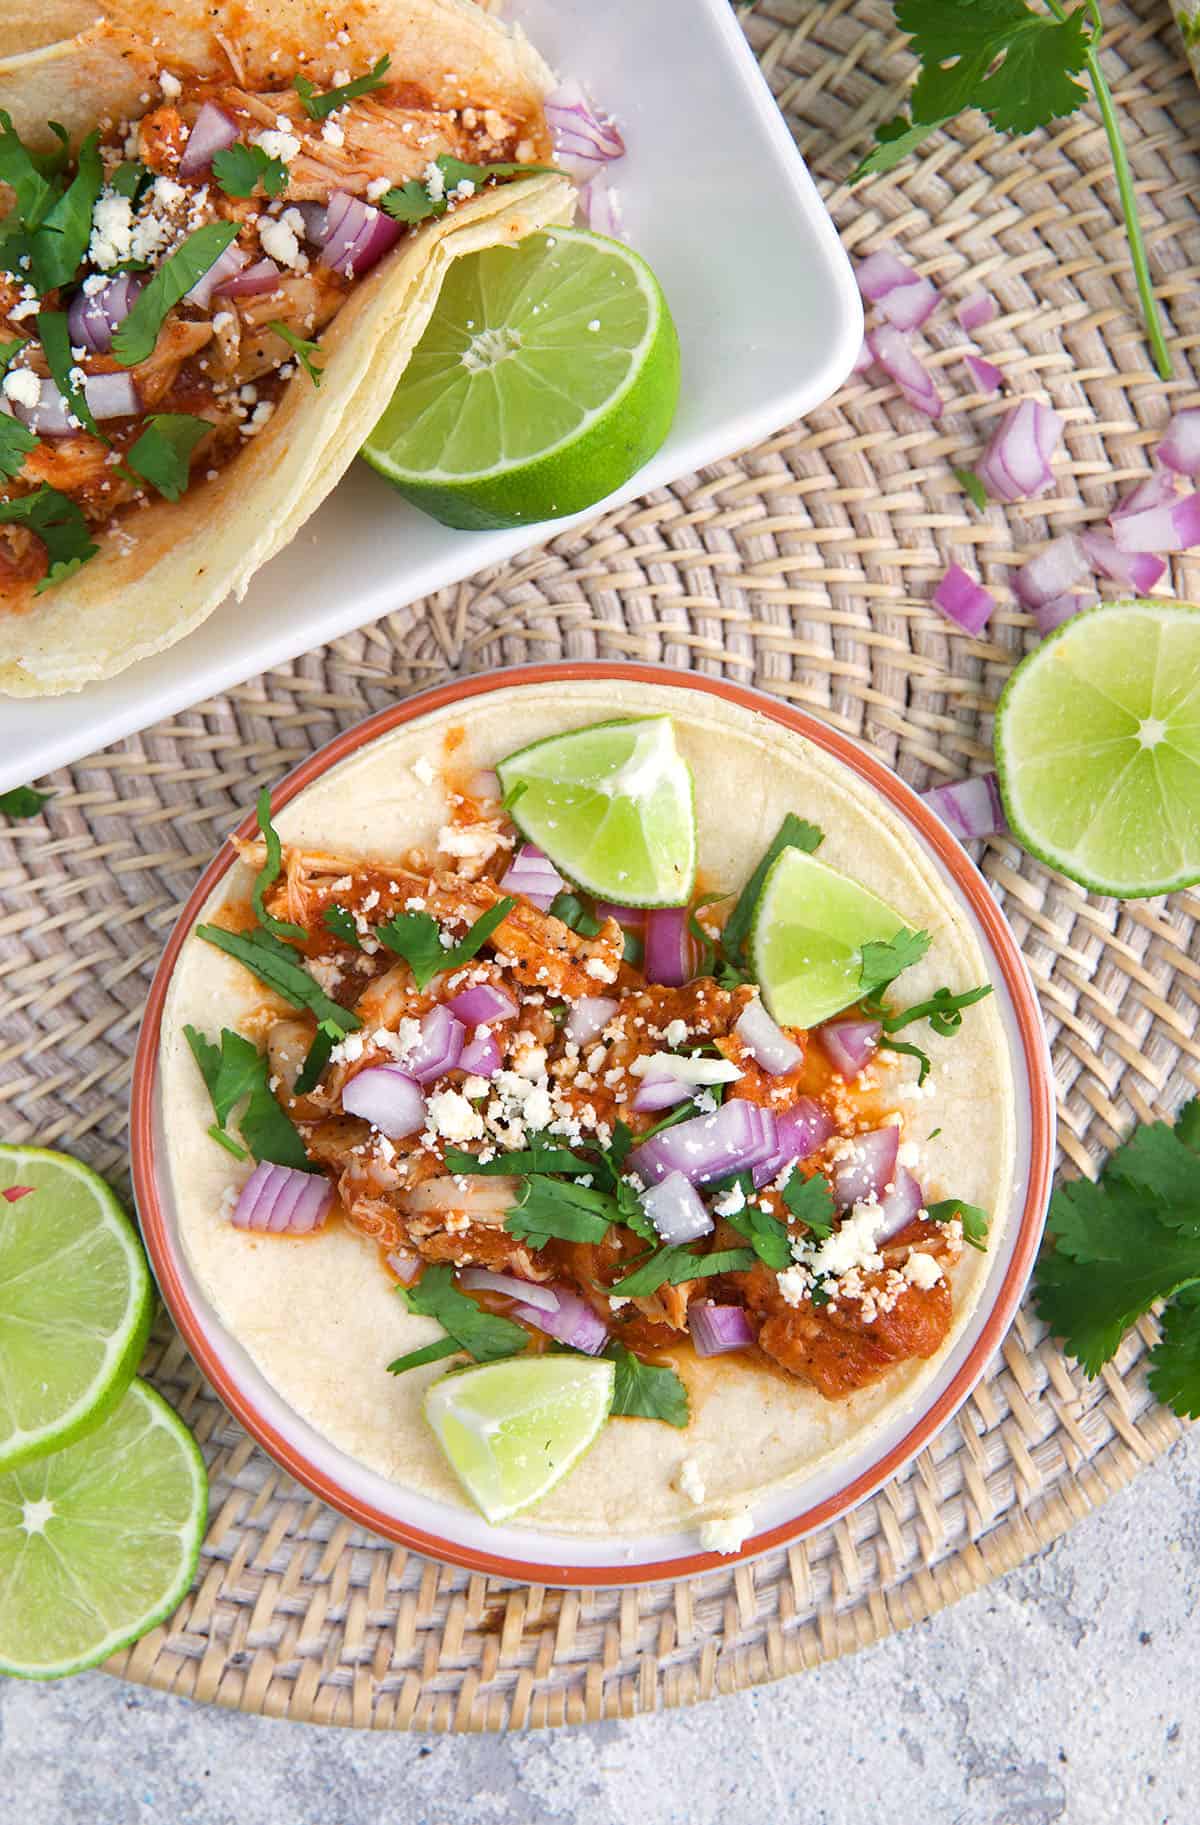 Tacos are garnished with cilantro, cheese, onions and limes.